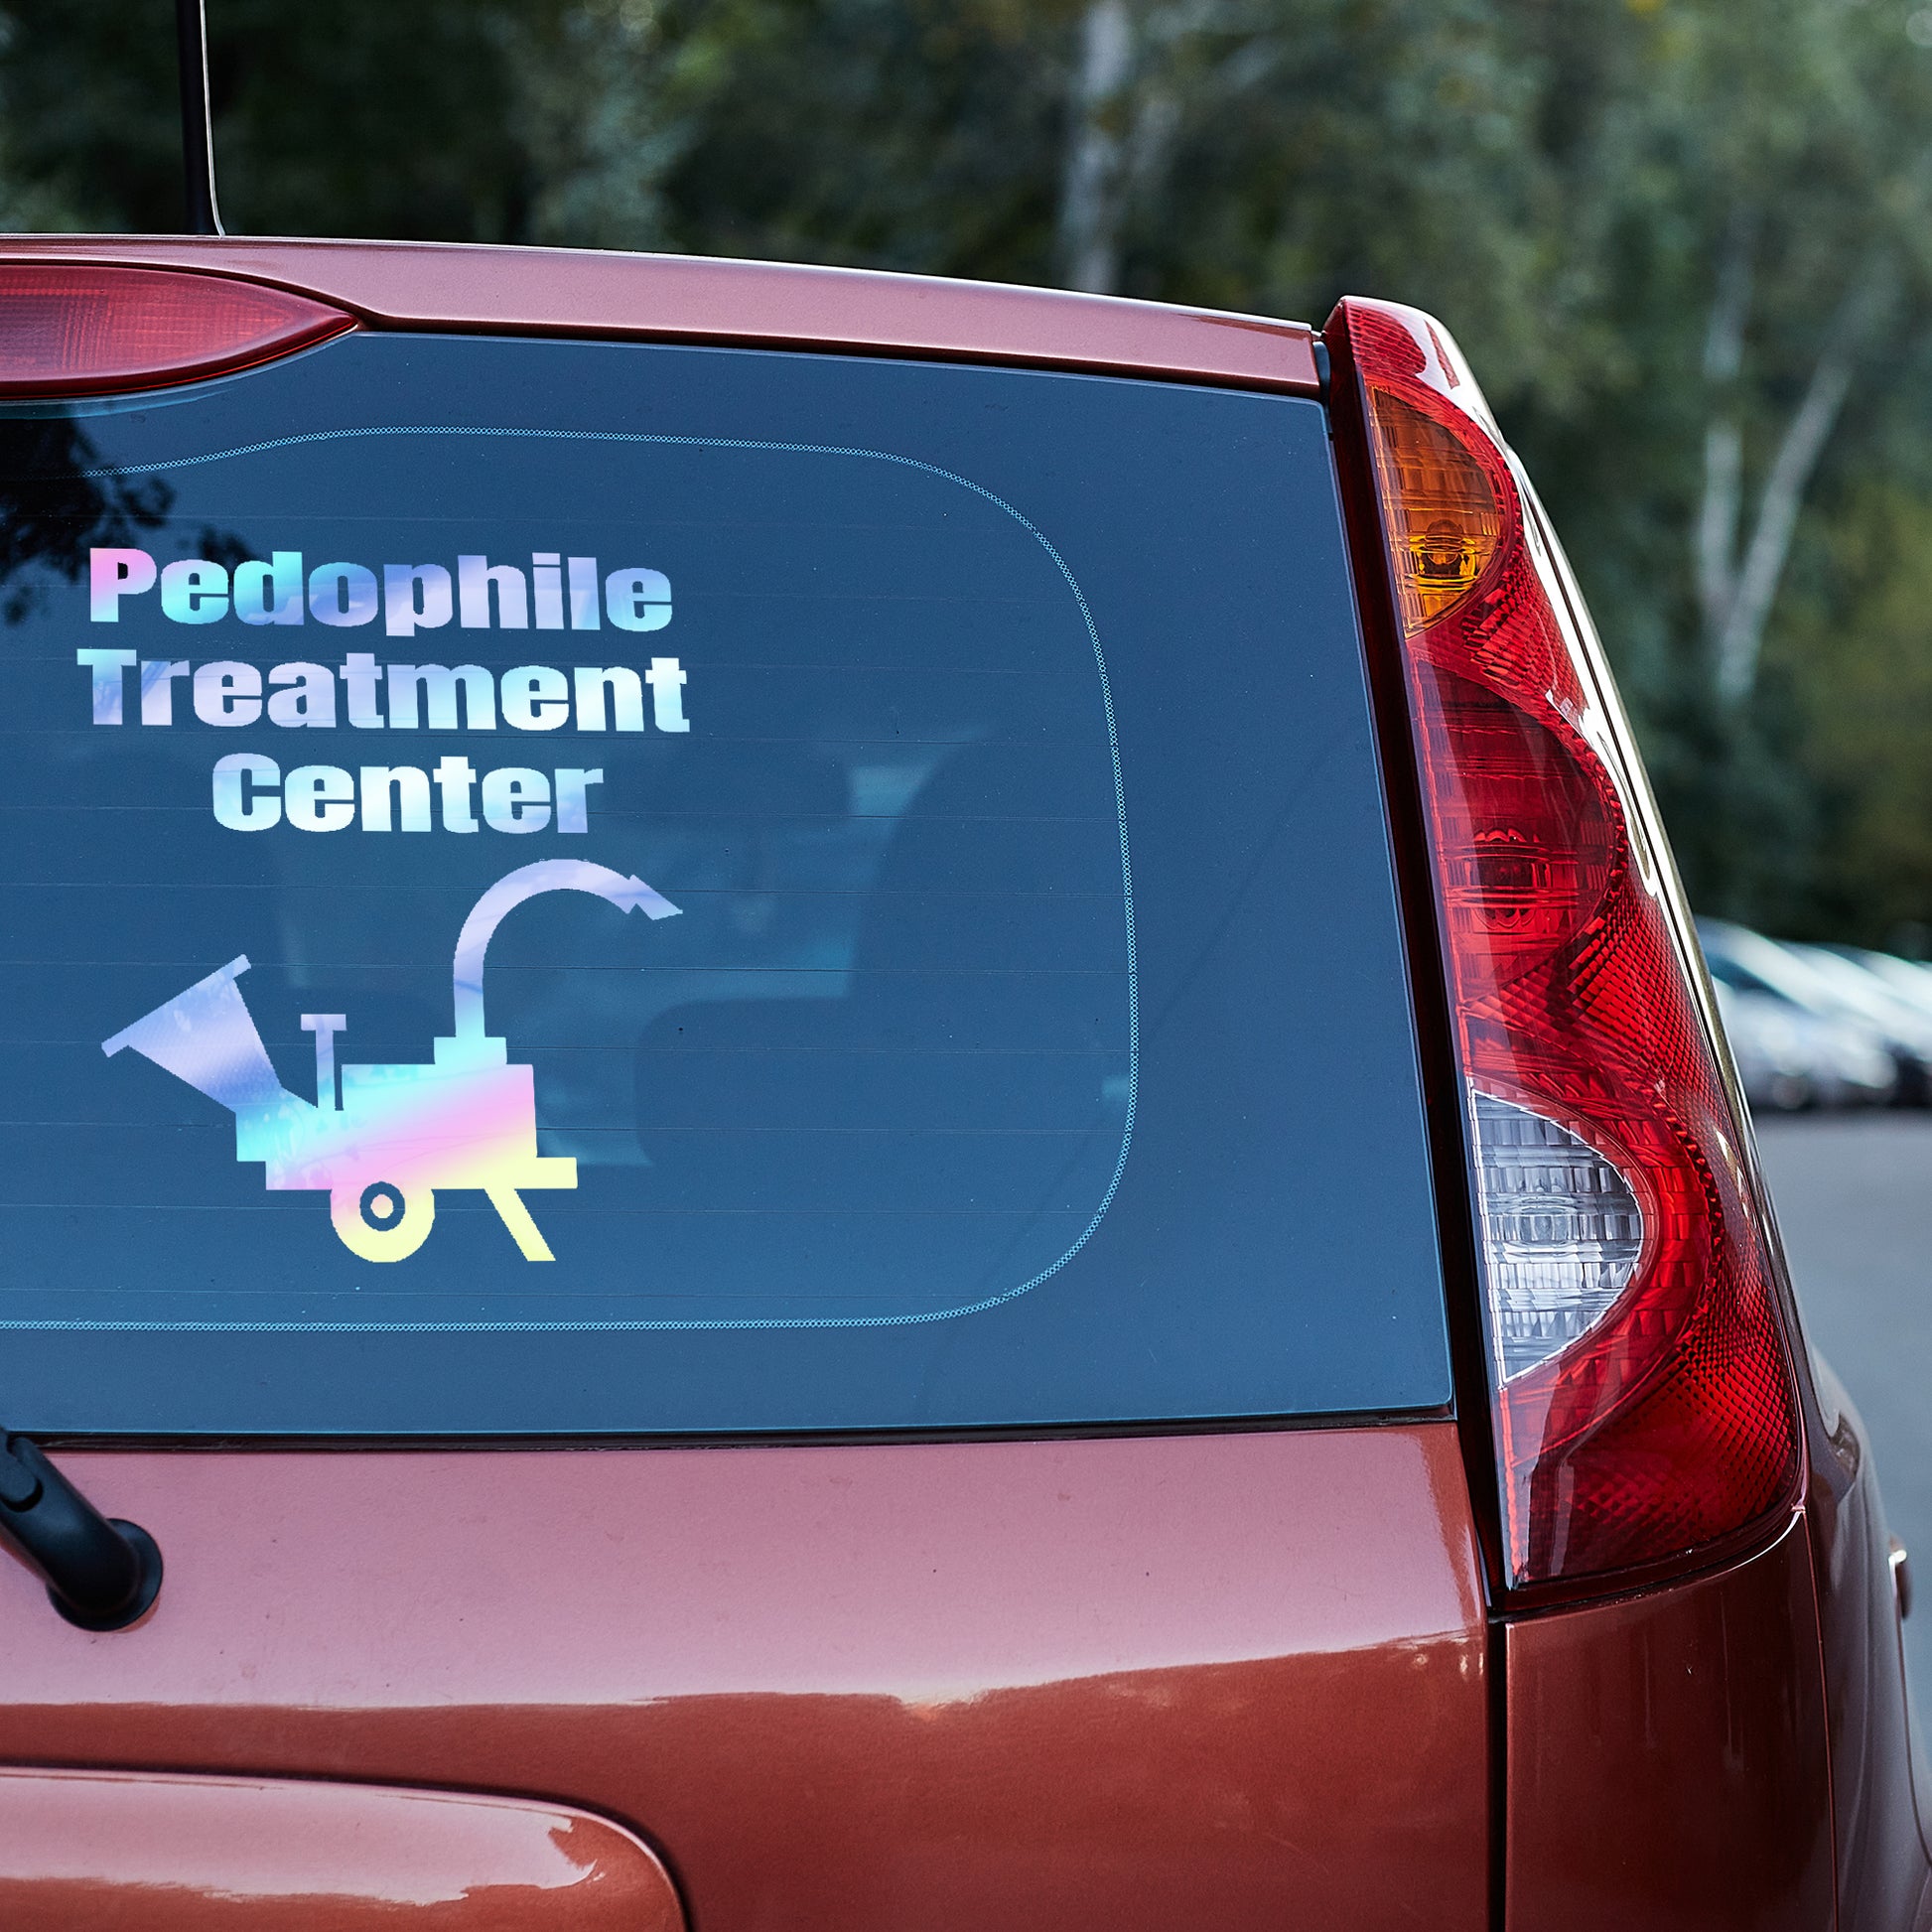 Pedophile Treatment Center vinyl decal car decal decal for cars decal for trucks Decals for cars Decals for Trucks decals for tumblers decals for vehicles door decal funny decals p diddy Window decals